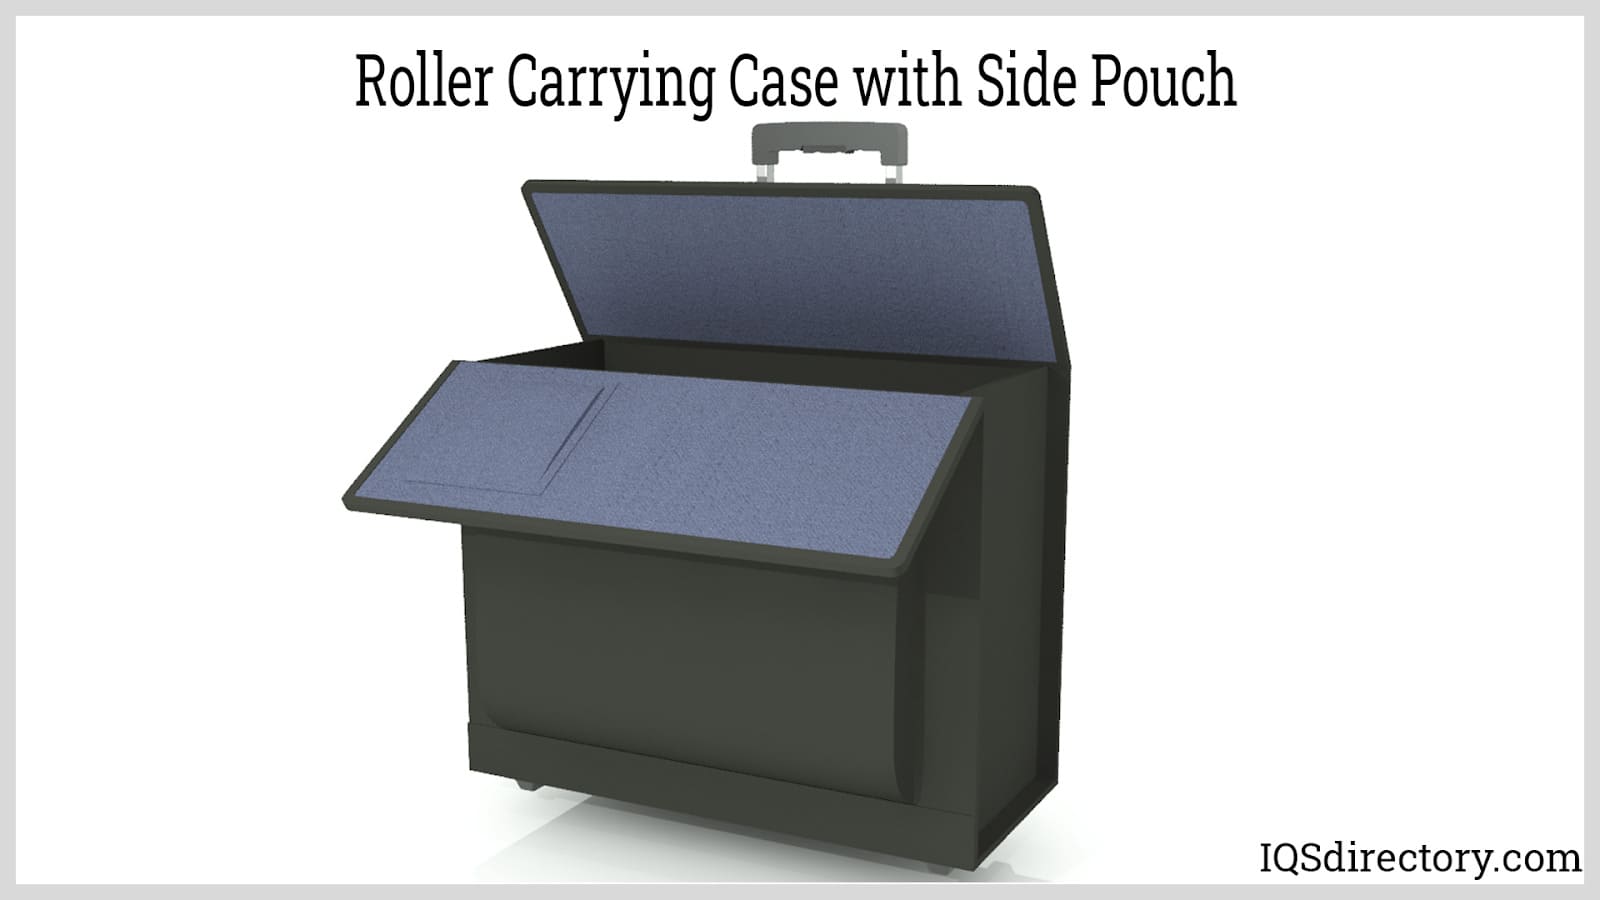 Roller Carrying Case with Side Pouch